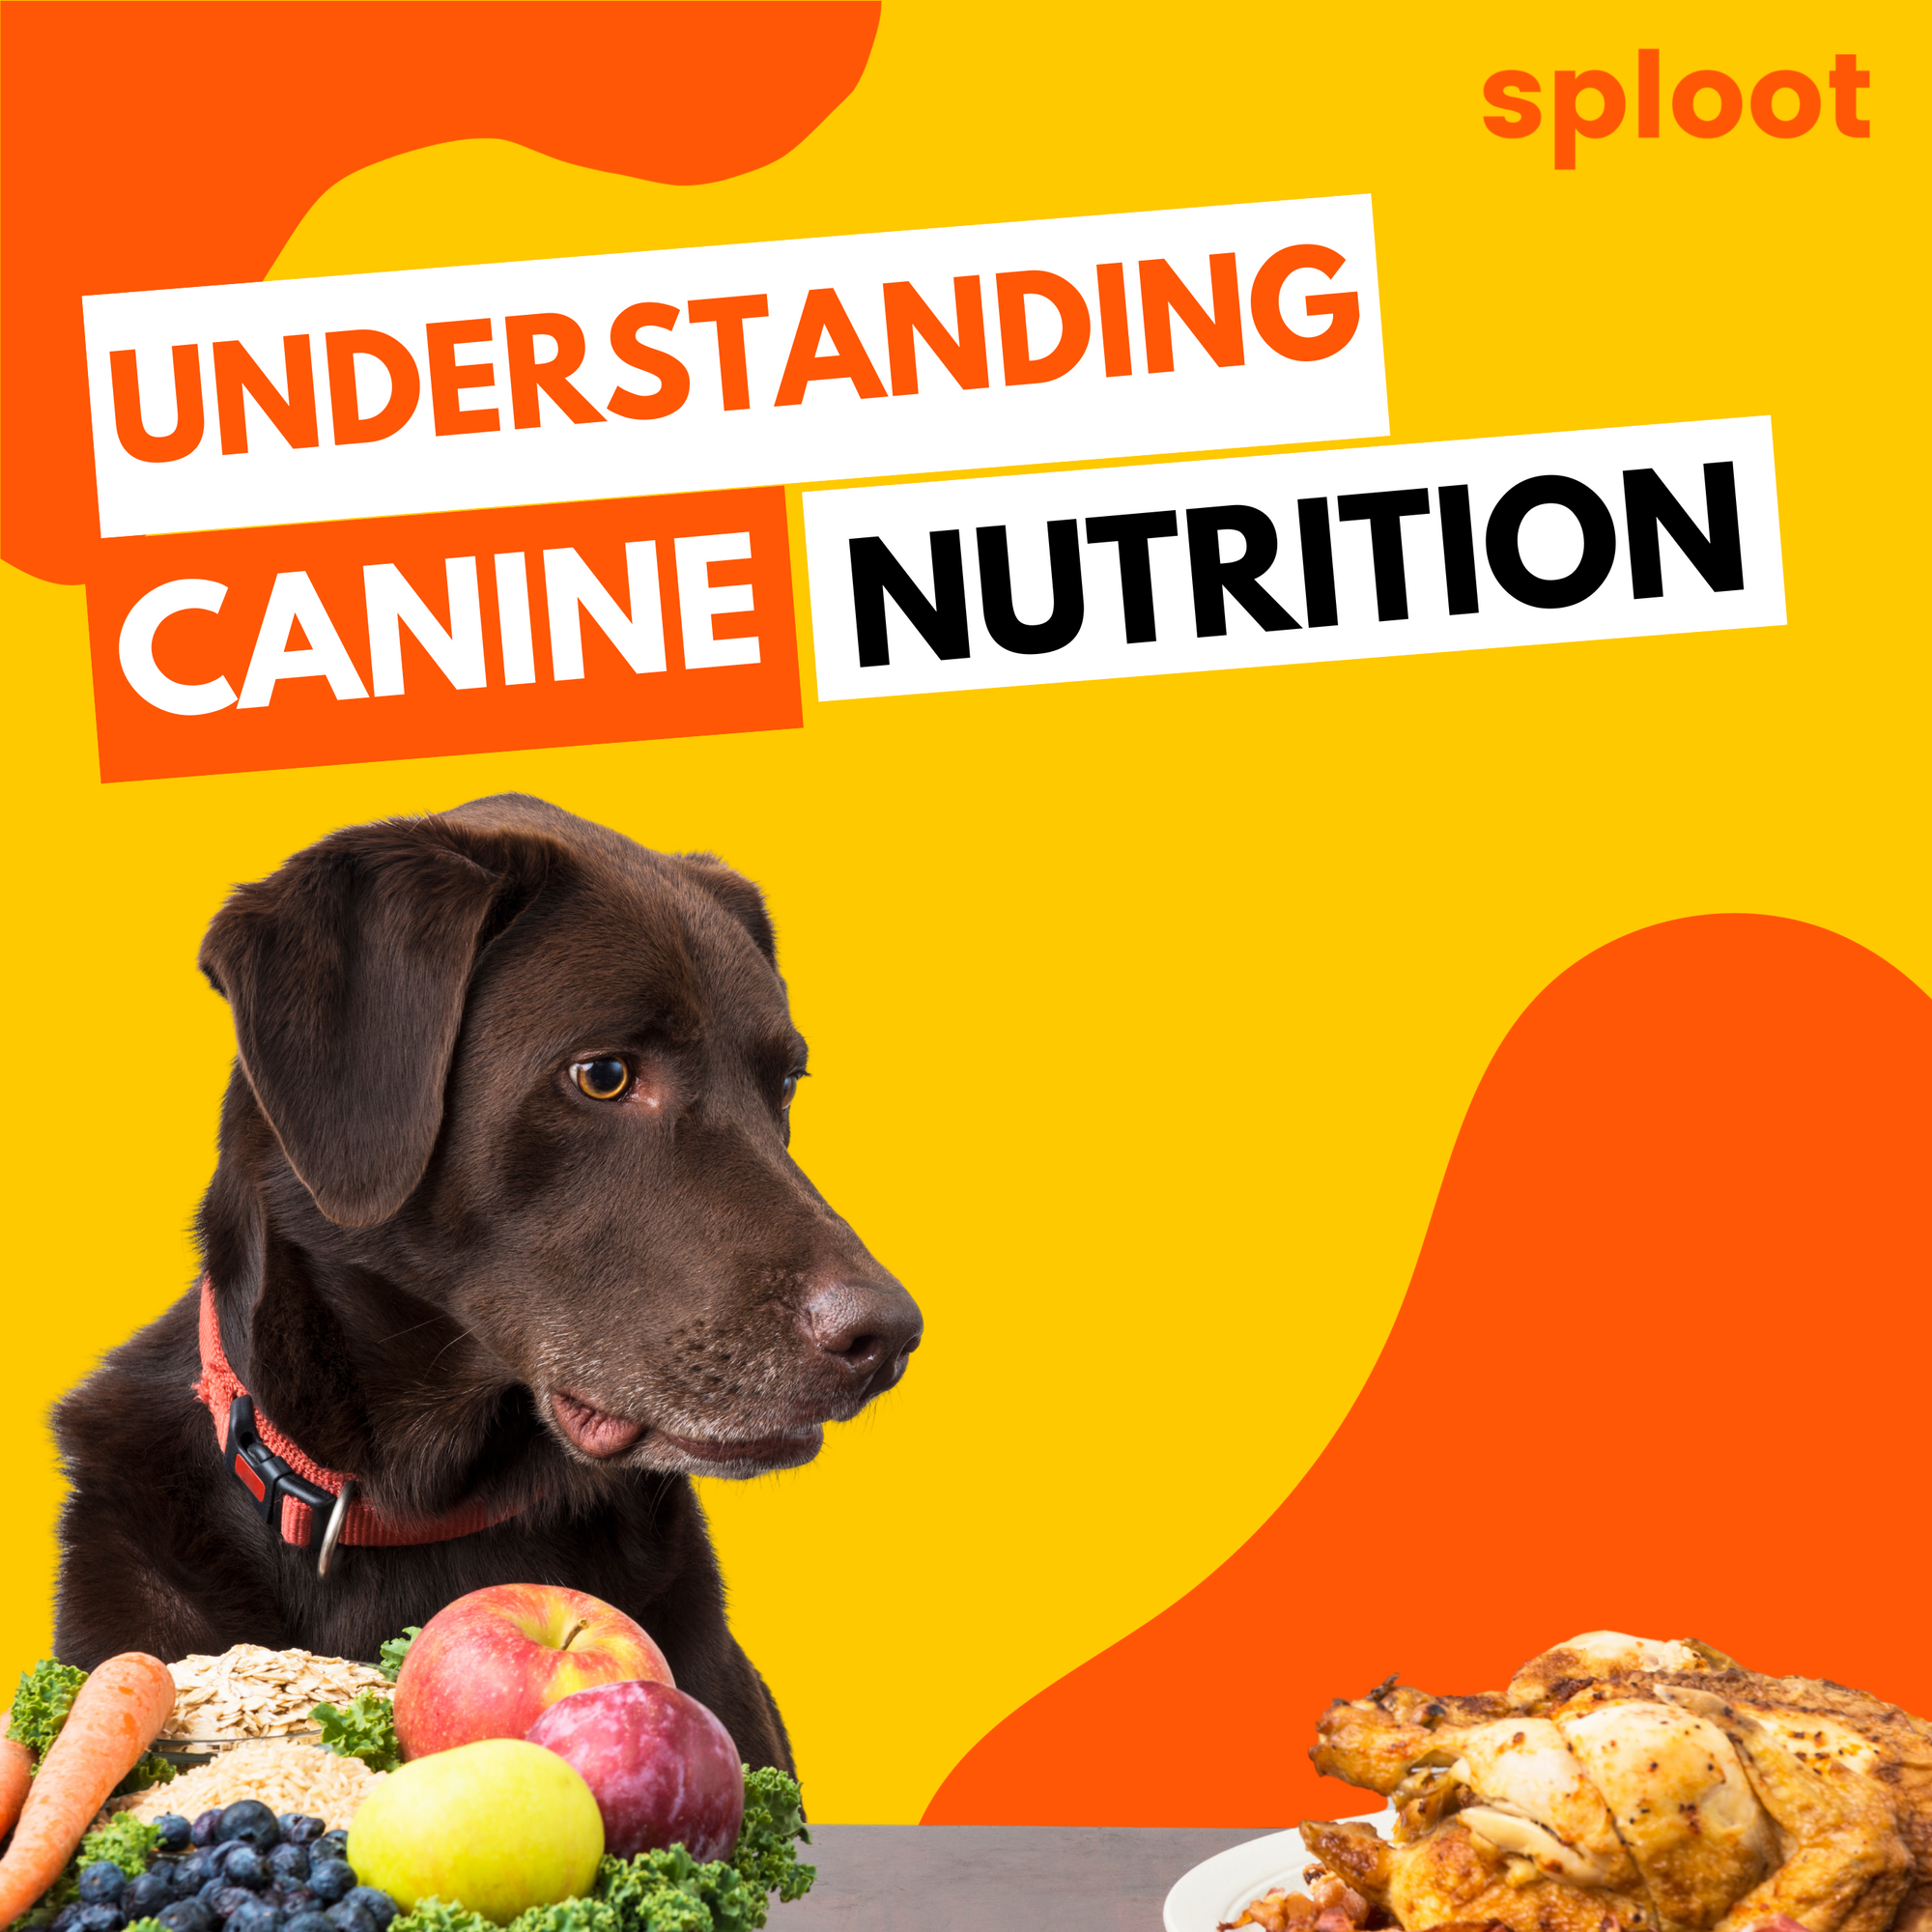 A Guide To Canine Nutrition